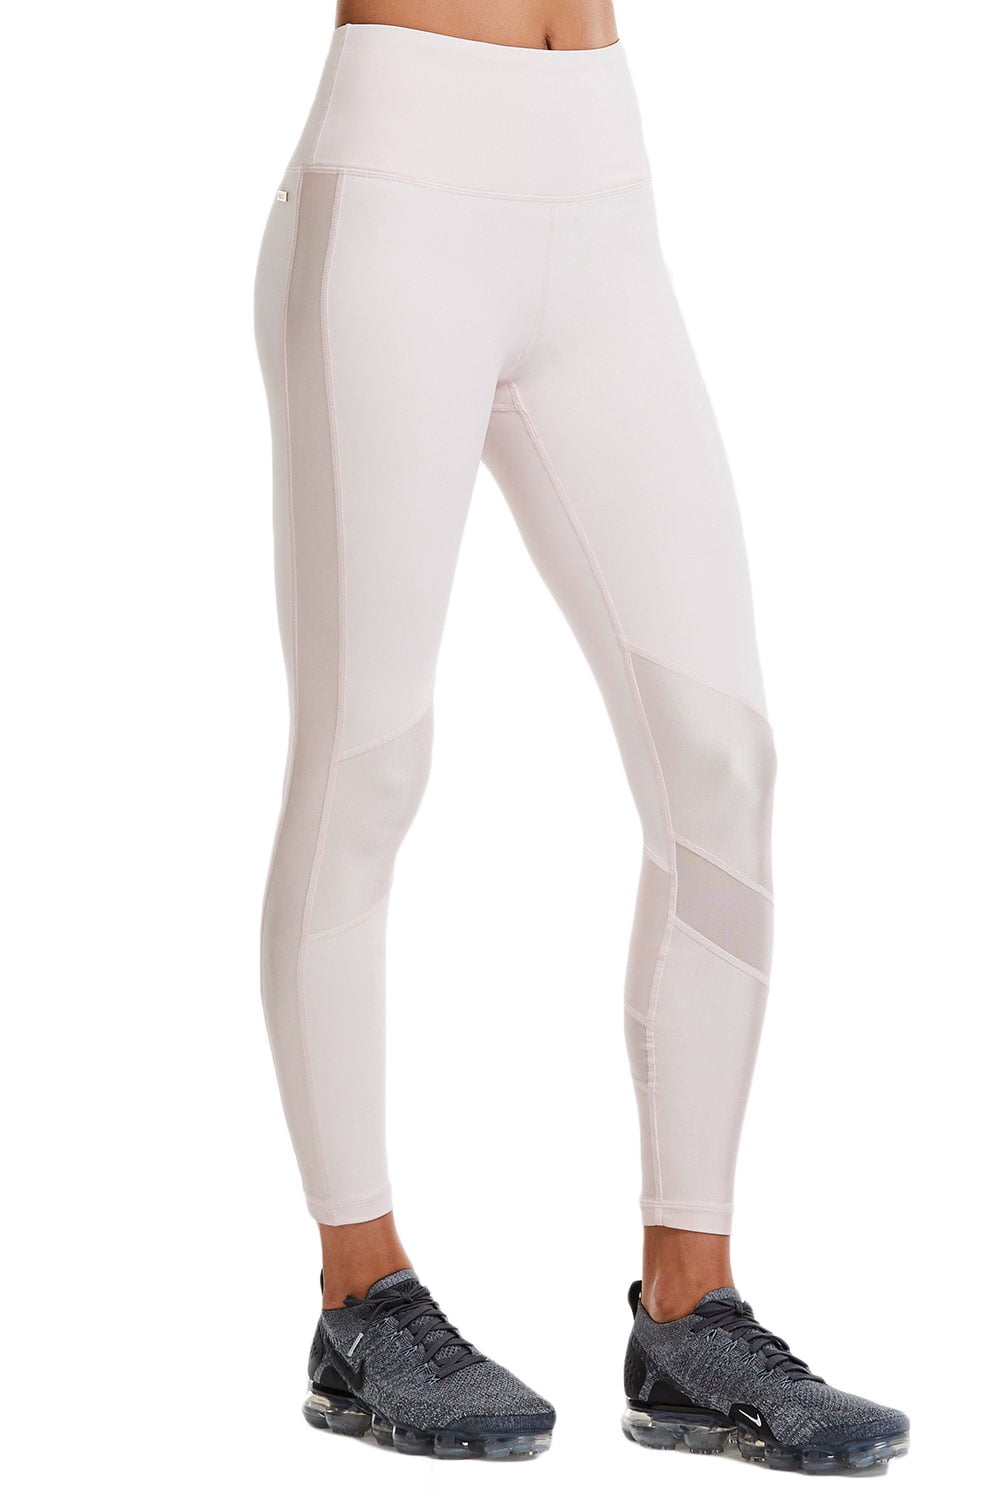 Alala Compression Captain Tights Review - Agent Athletica